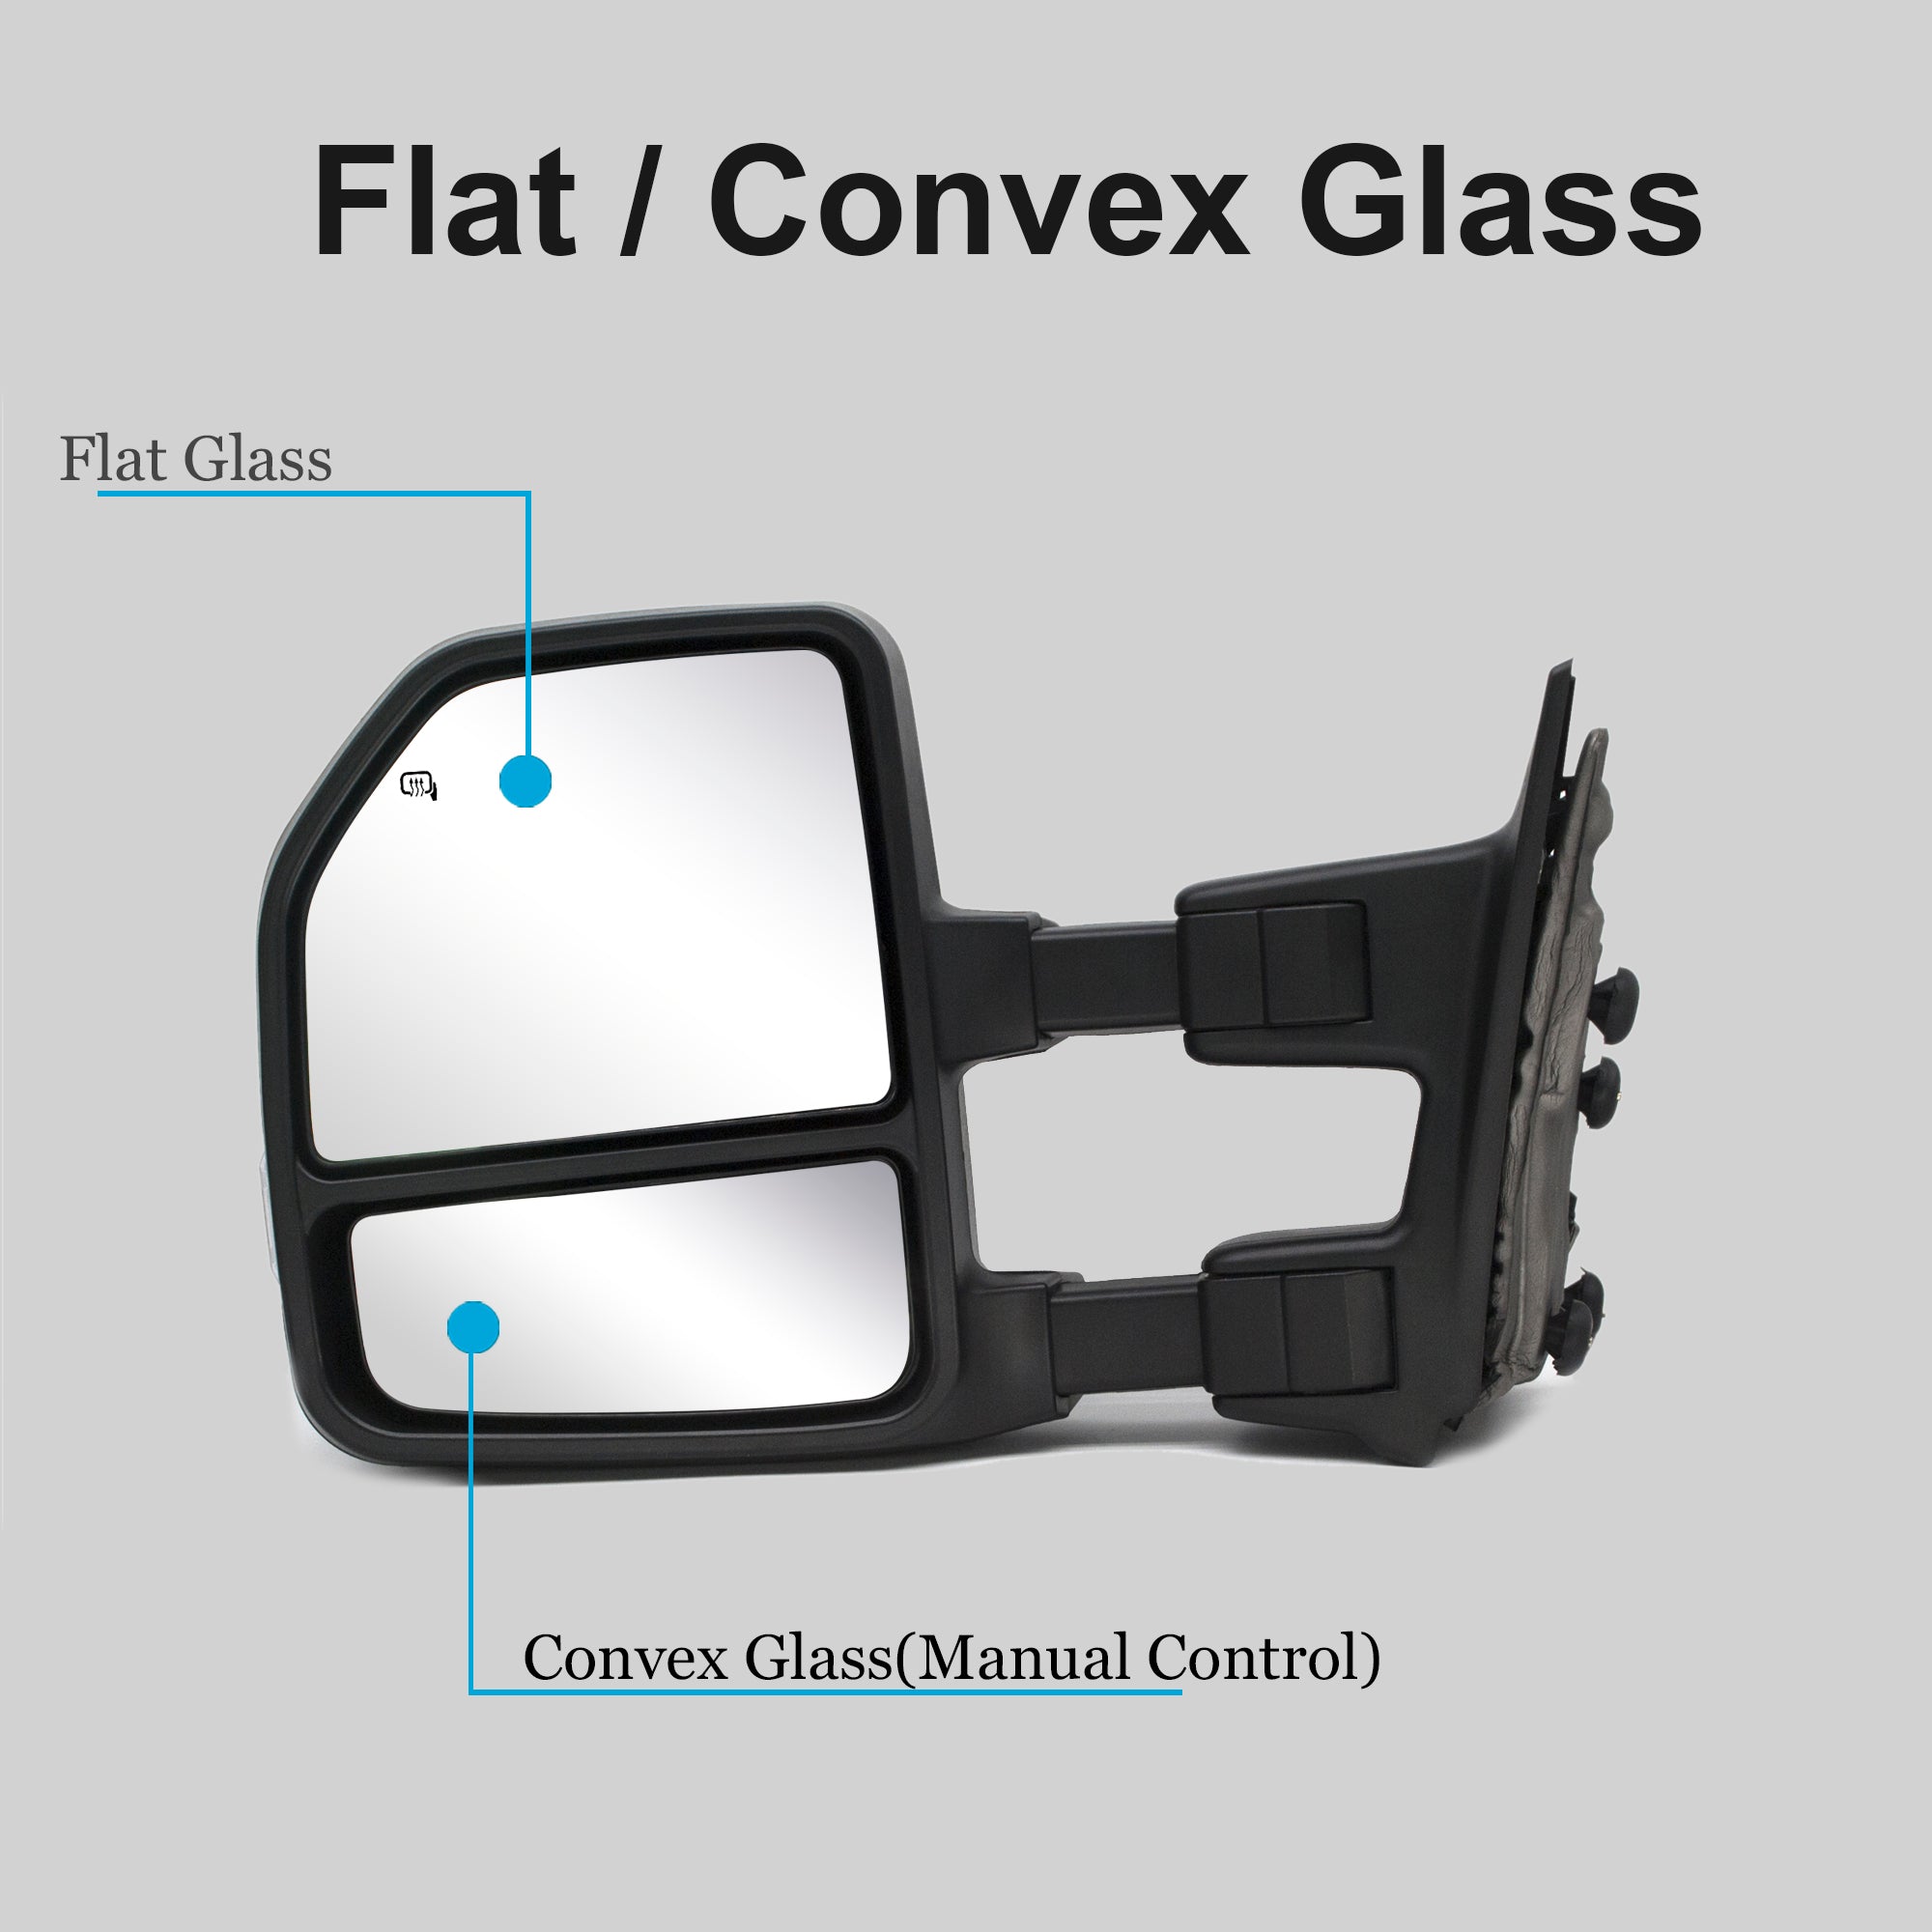 Towing Mirrors for 1999-2016 Ford F250 F350 F450 F550 Super Duty Manual Adjustment Glass Manual Extendable, Chrome Cap 18C